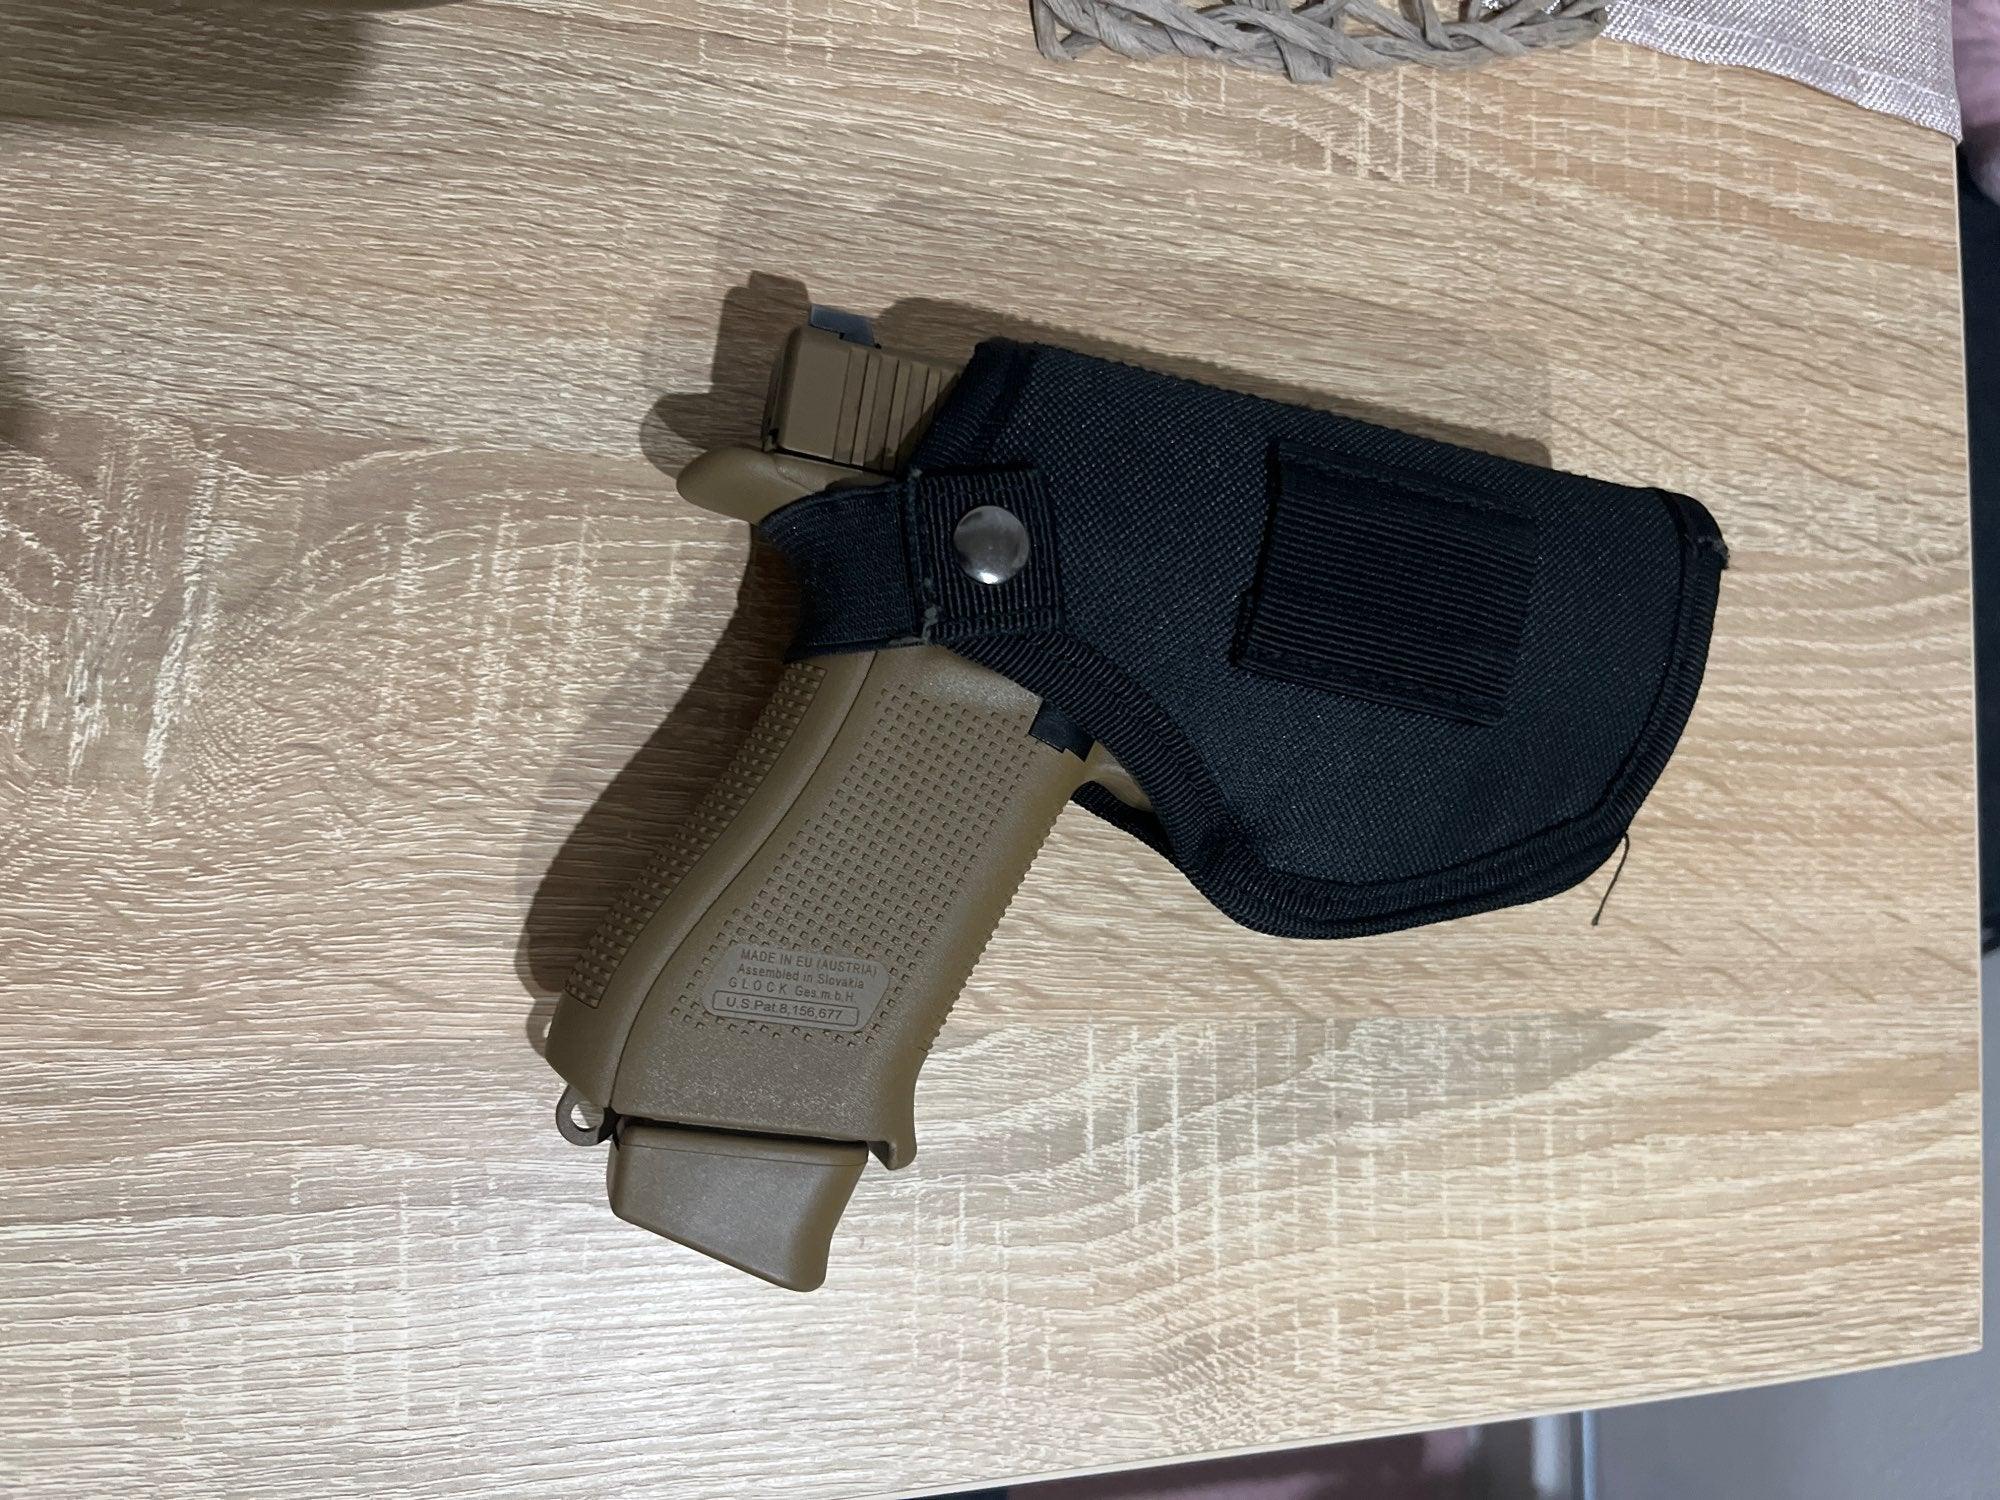 AMBIDEXTROUS IWB HOLSTER W/ STEEL CLIP JD-16 - NeonSales South Africa